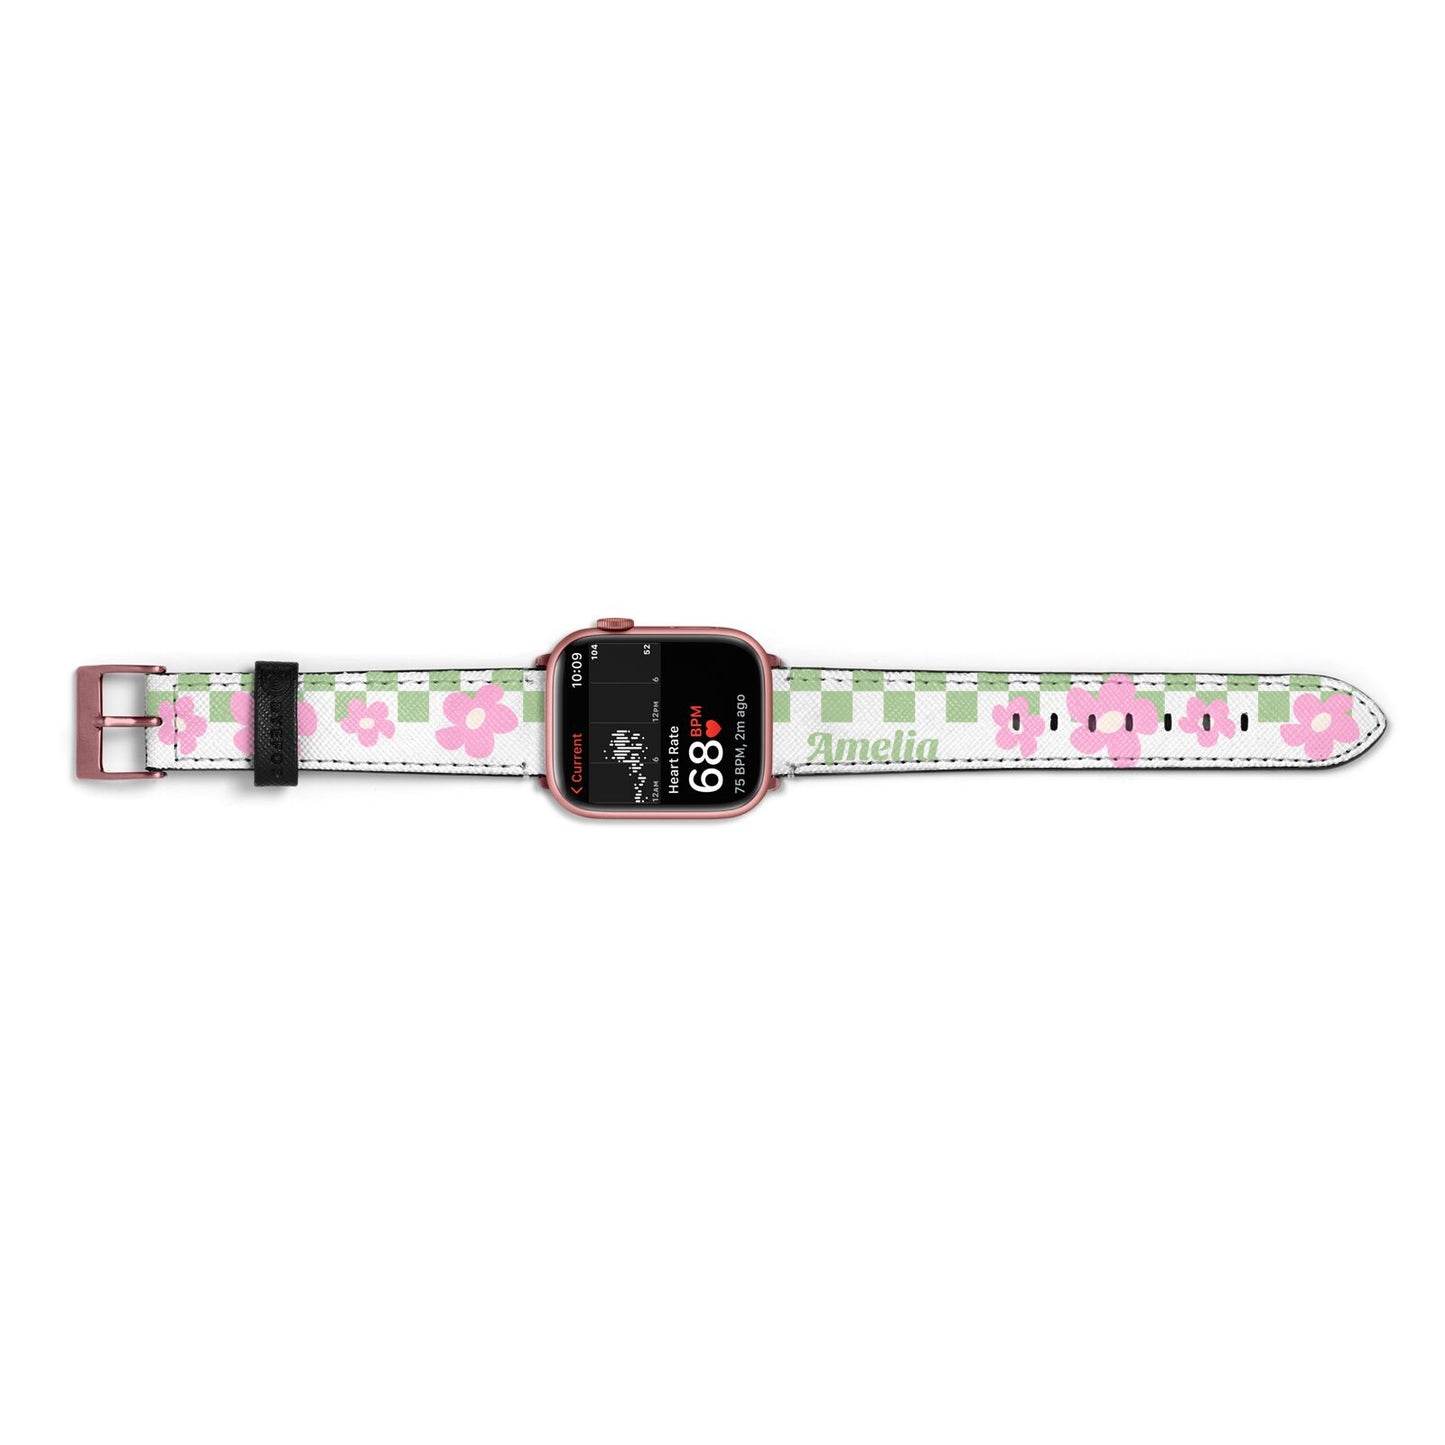 Personalised Check Floral Apple Watch Strap Size 38mm Landscape Image Rose Gold Hardware